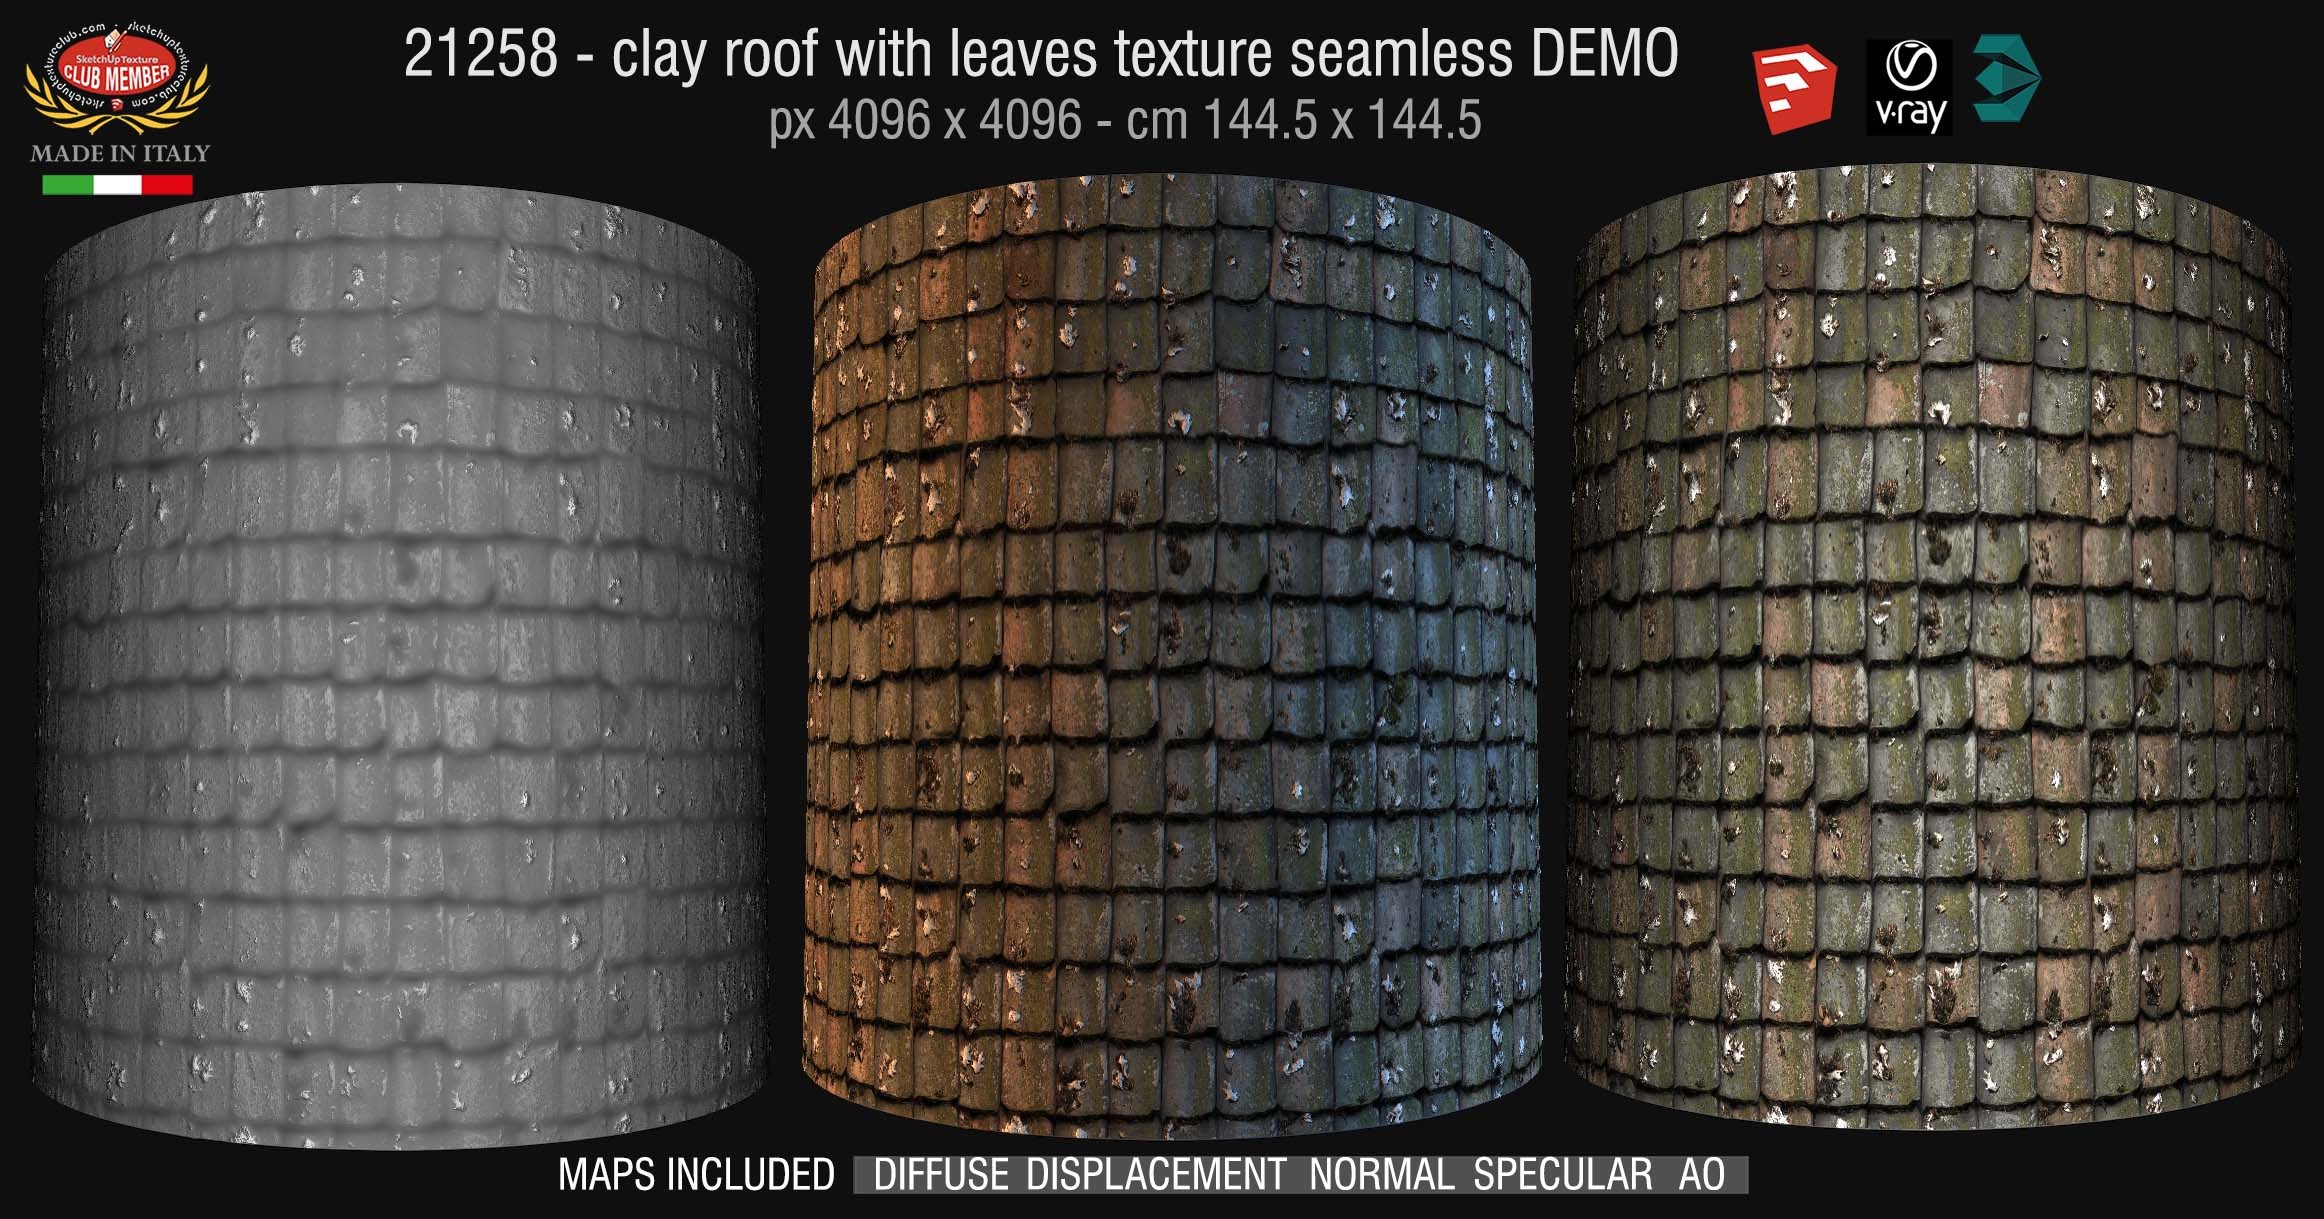 21258 Clay roof with leaves texture + maps DEMO